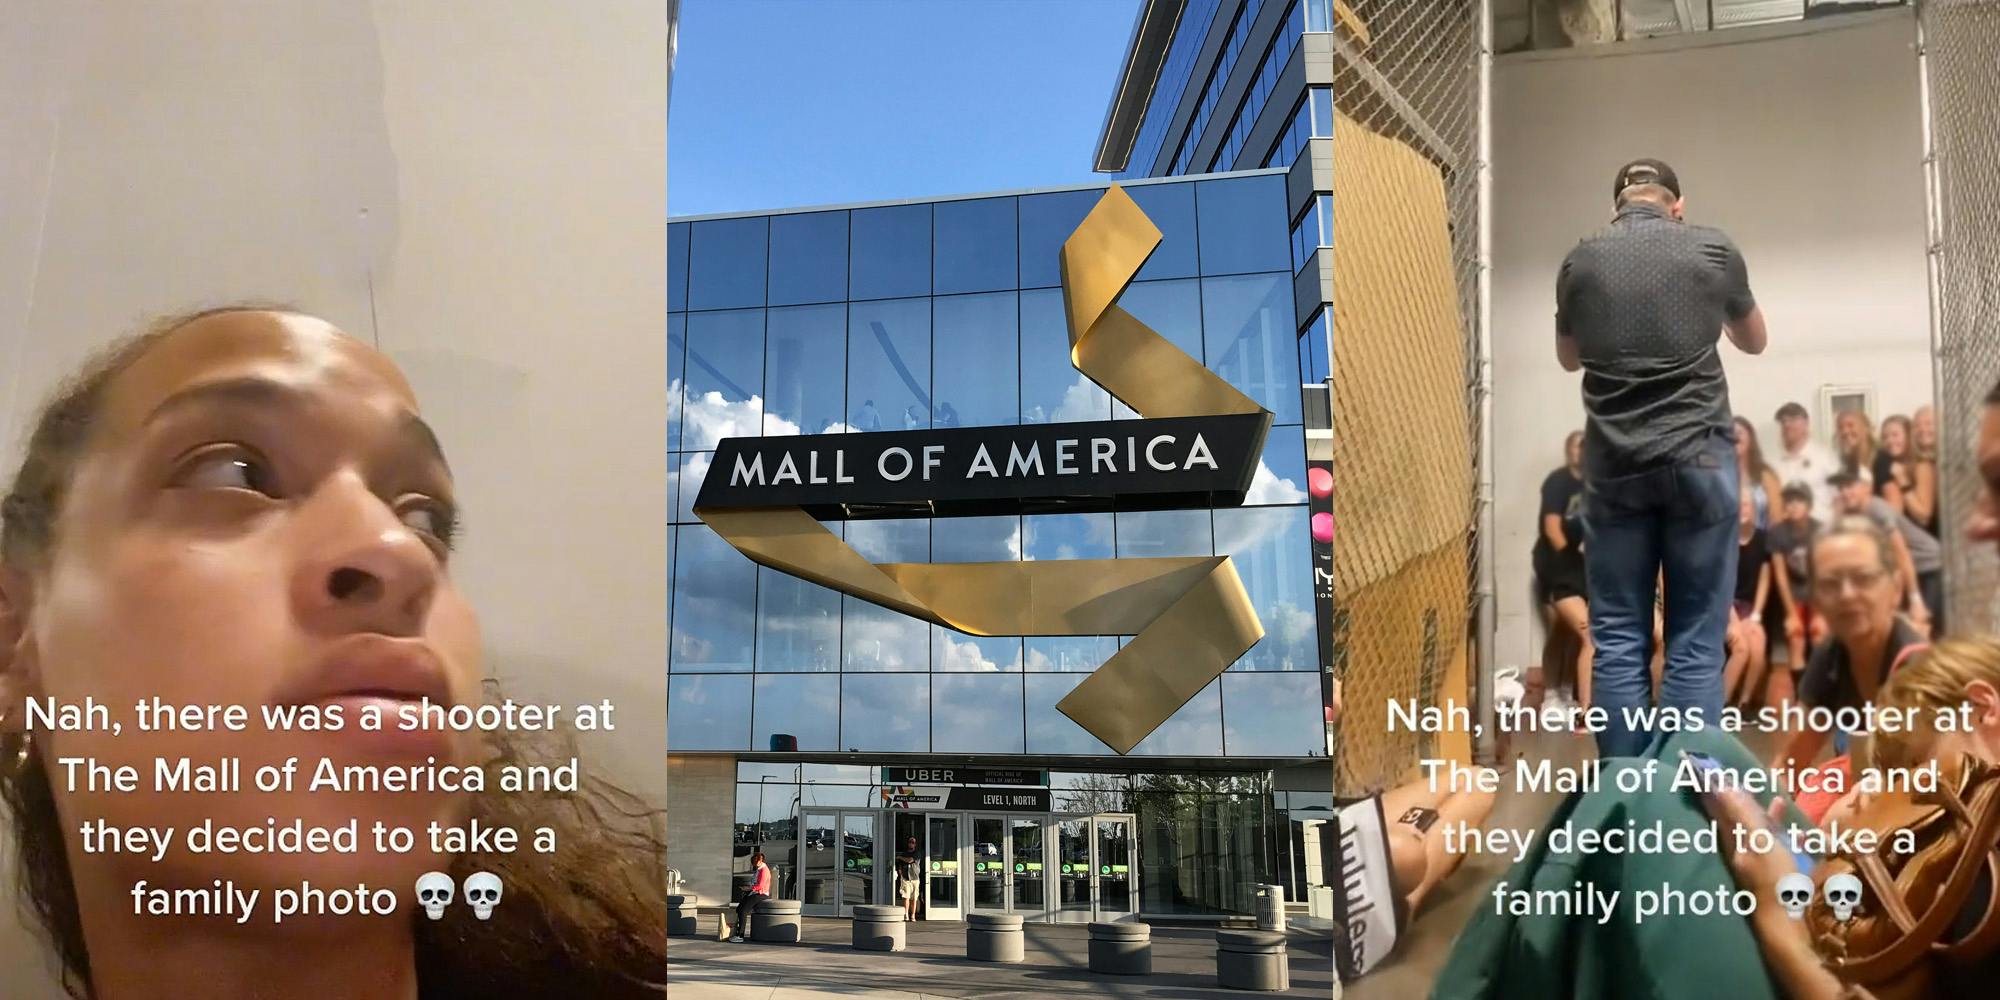 woman face turned to right caption "Nah, there was a shooter at The Mall of America and they decided to take a family photo" (l) Mall of America building with sign (c) man standing holding camera taking family photo caption "Nah, there was a shooter at The Mall of America and they decided to take a family photo" (r)